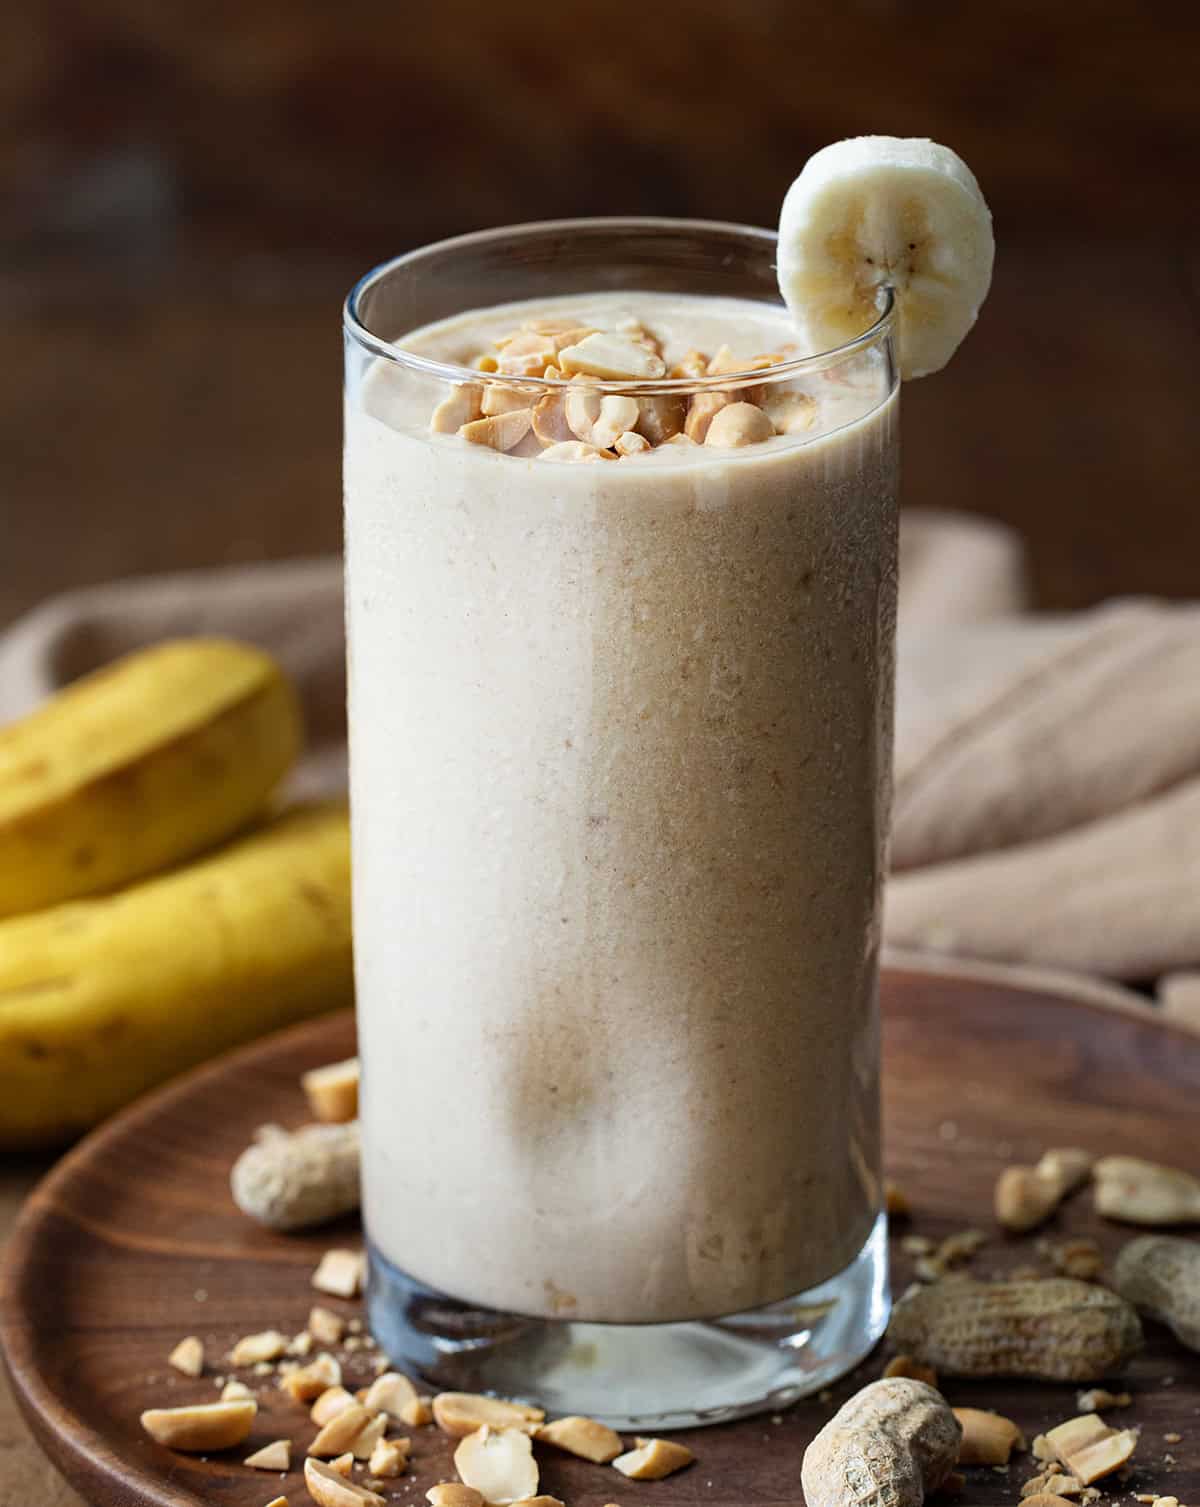 Peanut Butter Banana Smoothie on a dark table with a banana slice garnish and peanuts.